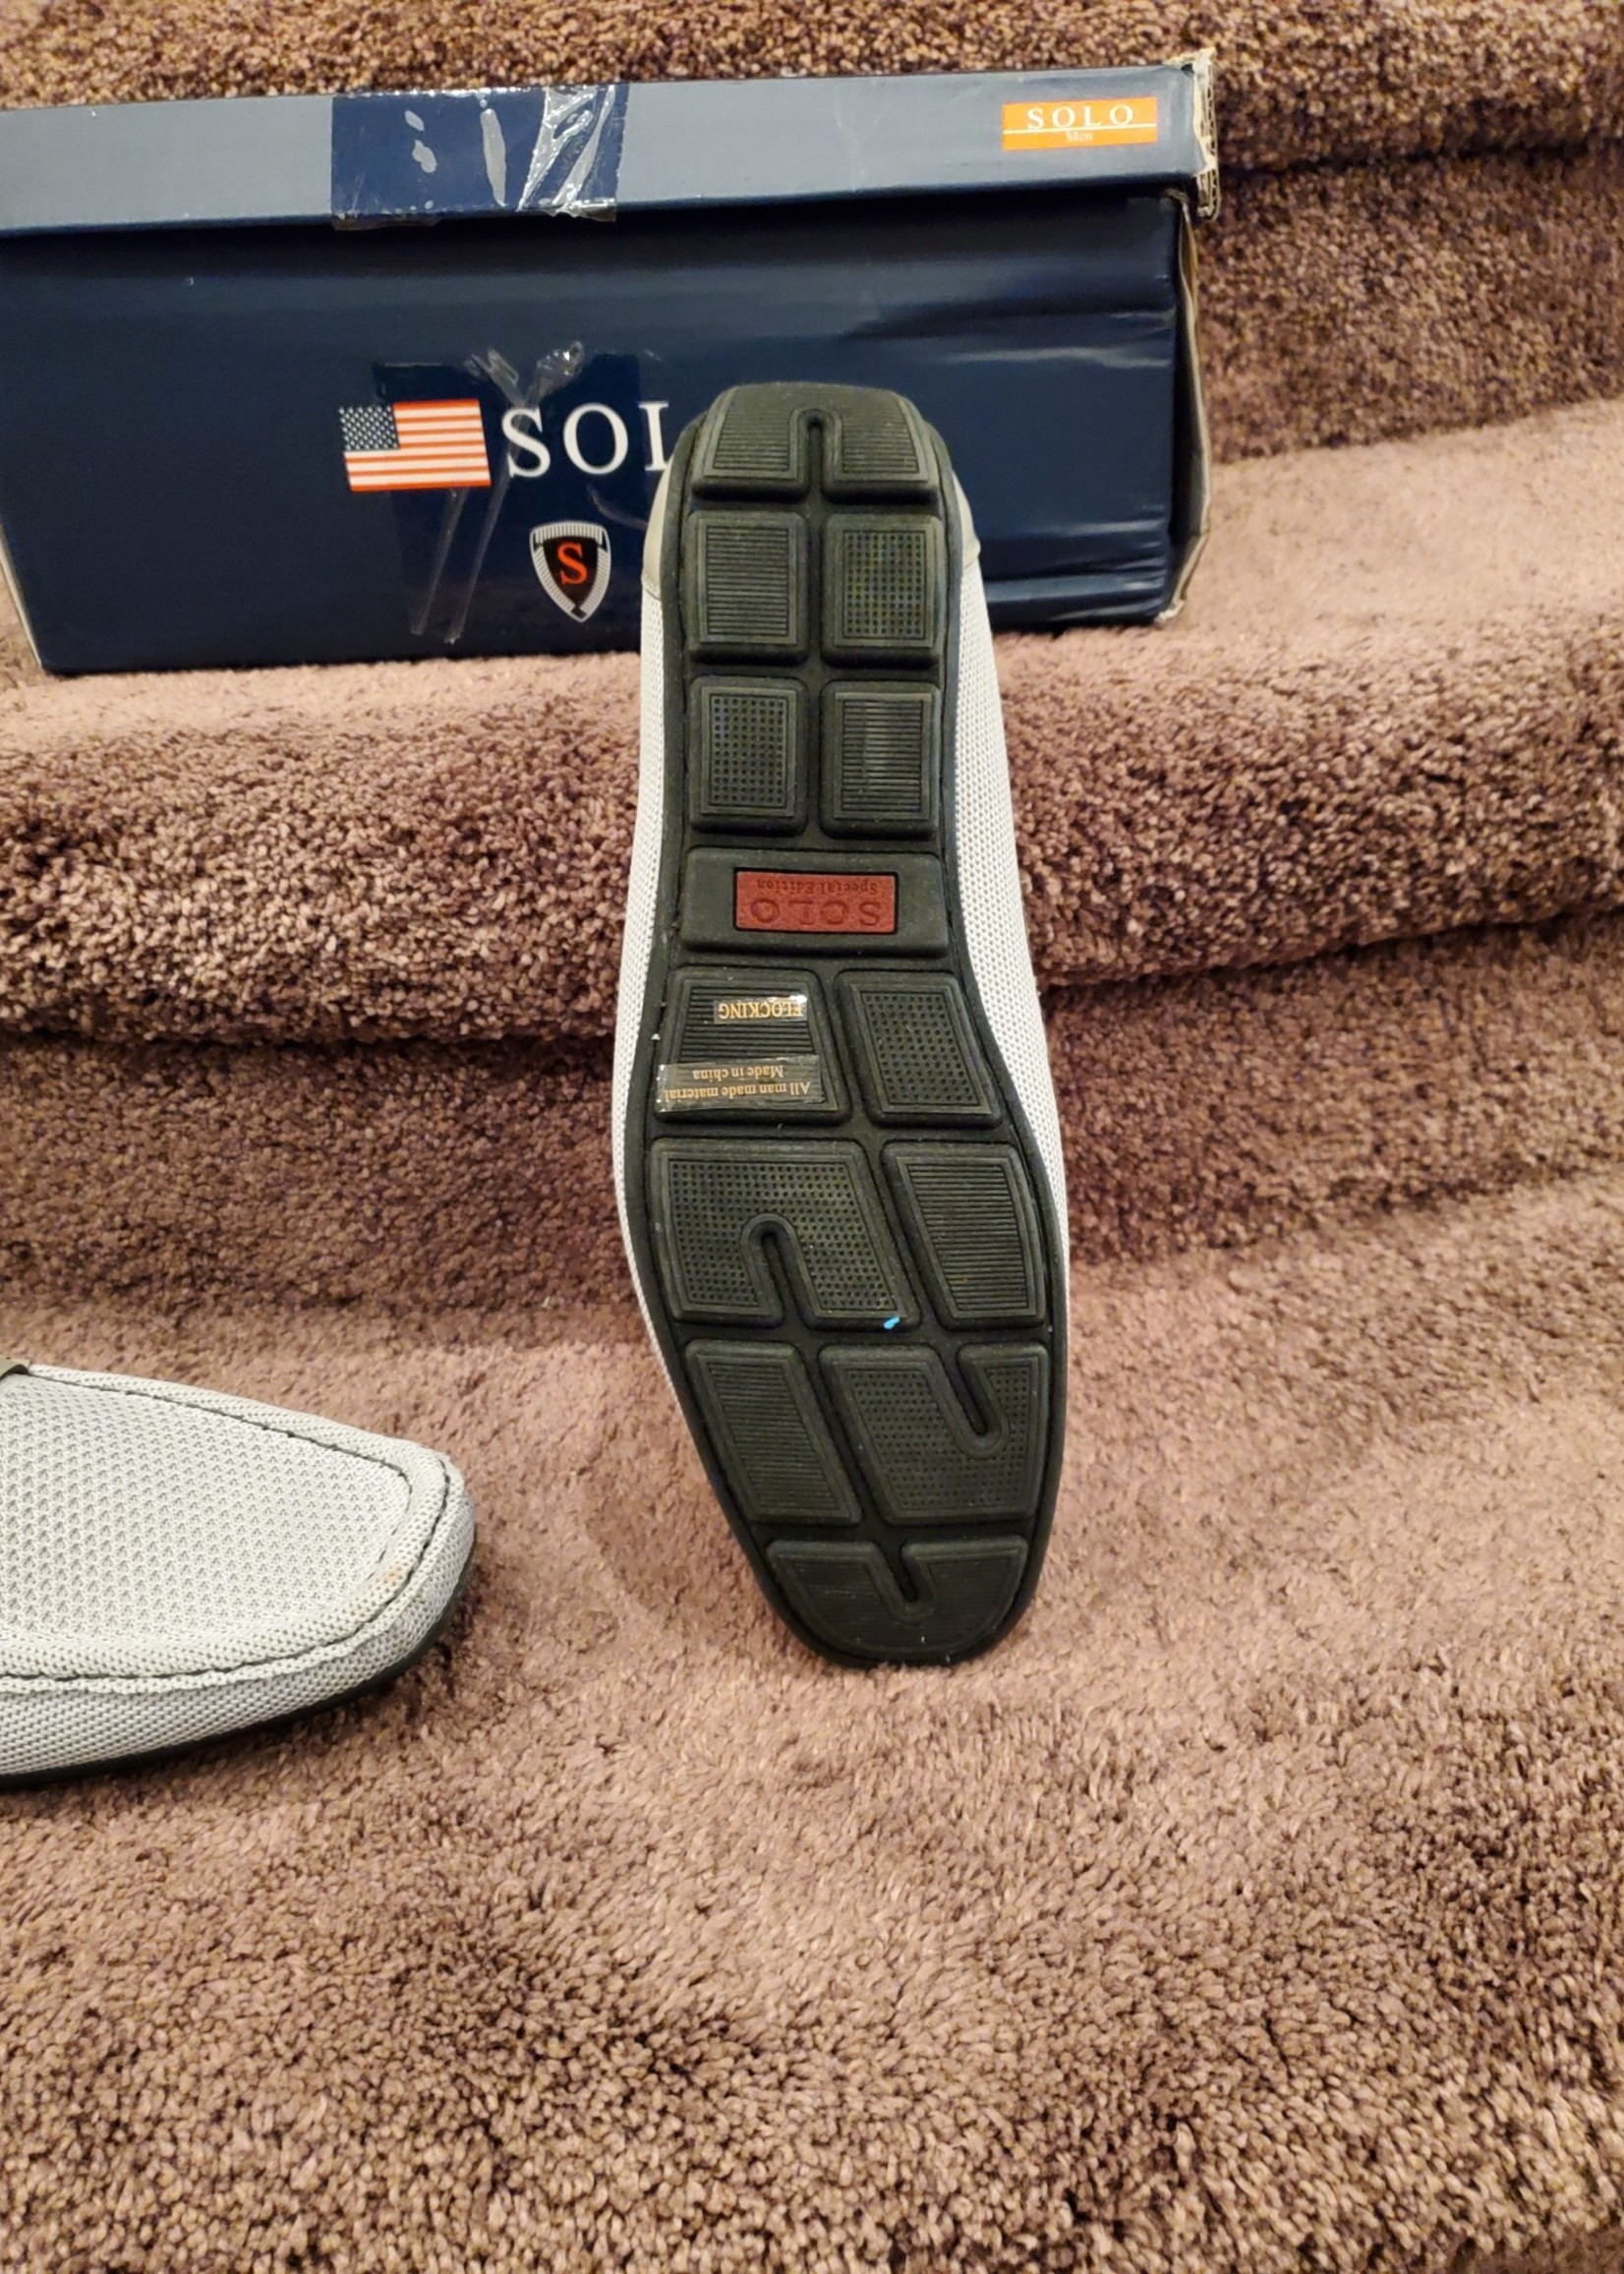 solo mens loafers